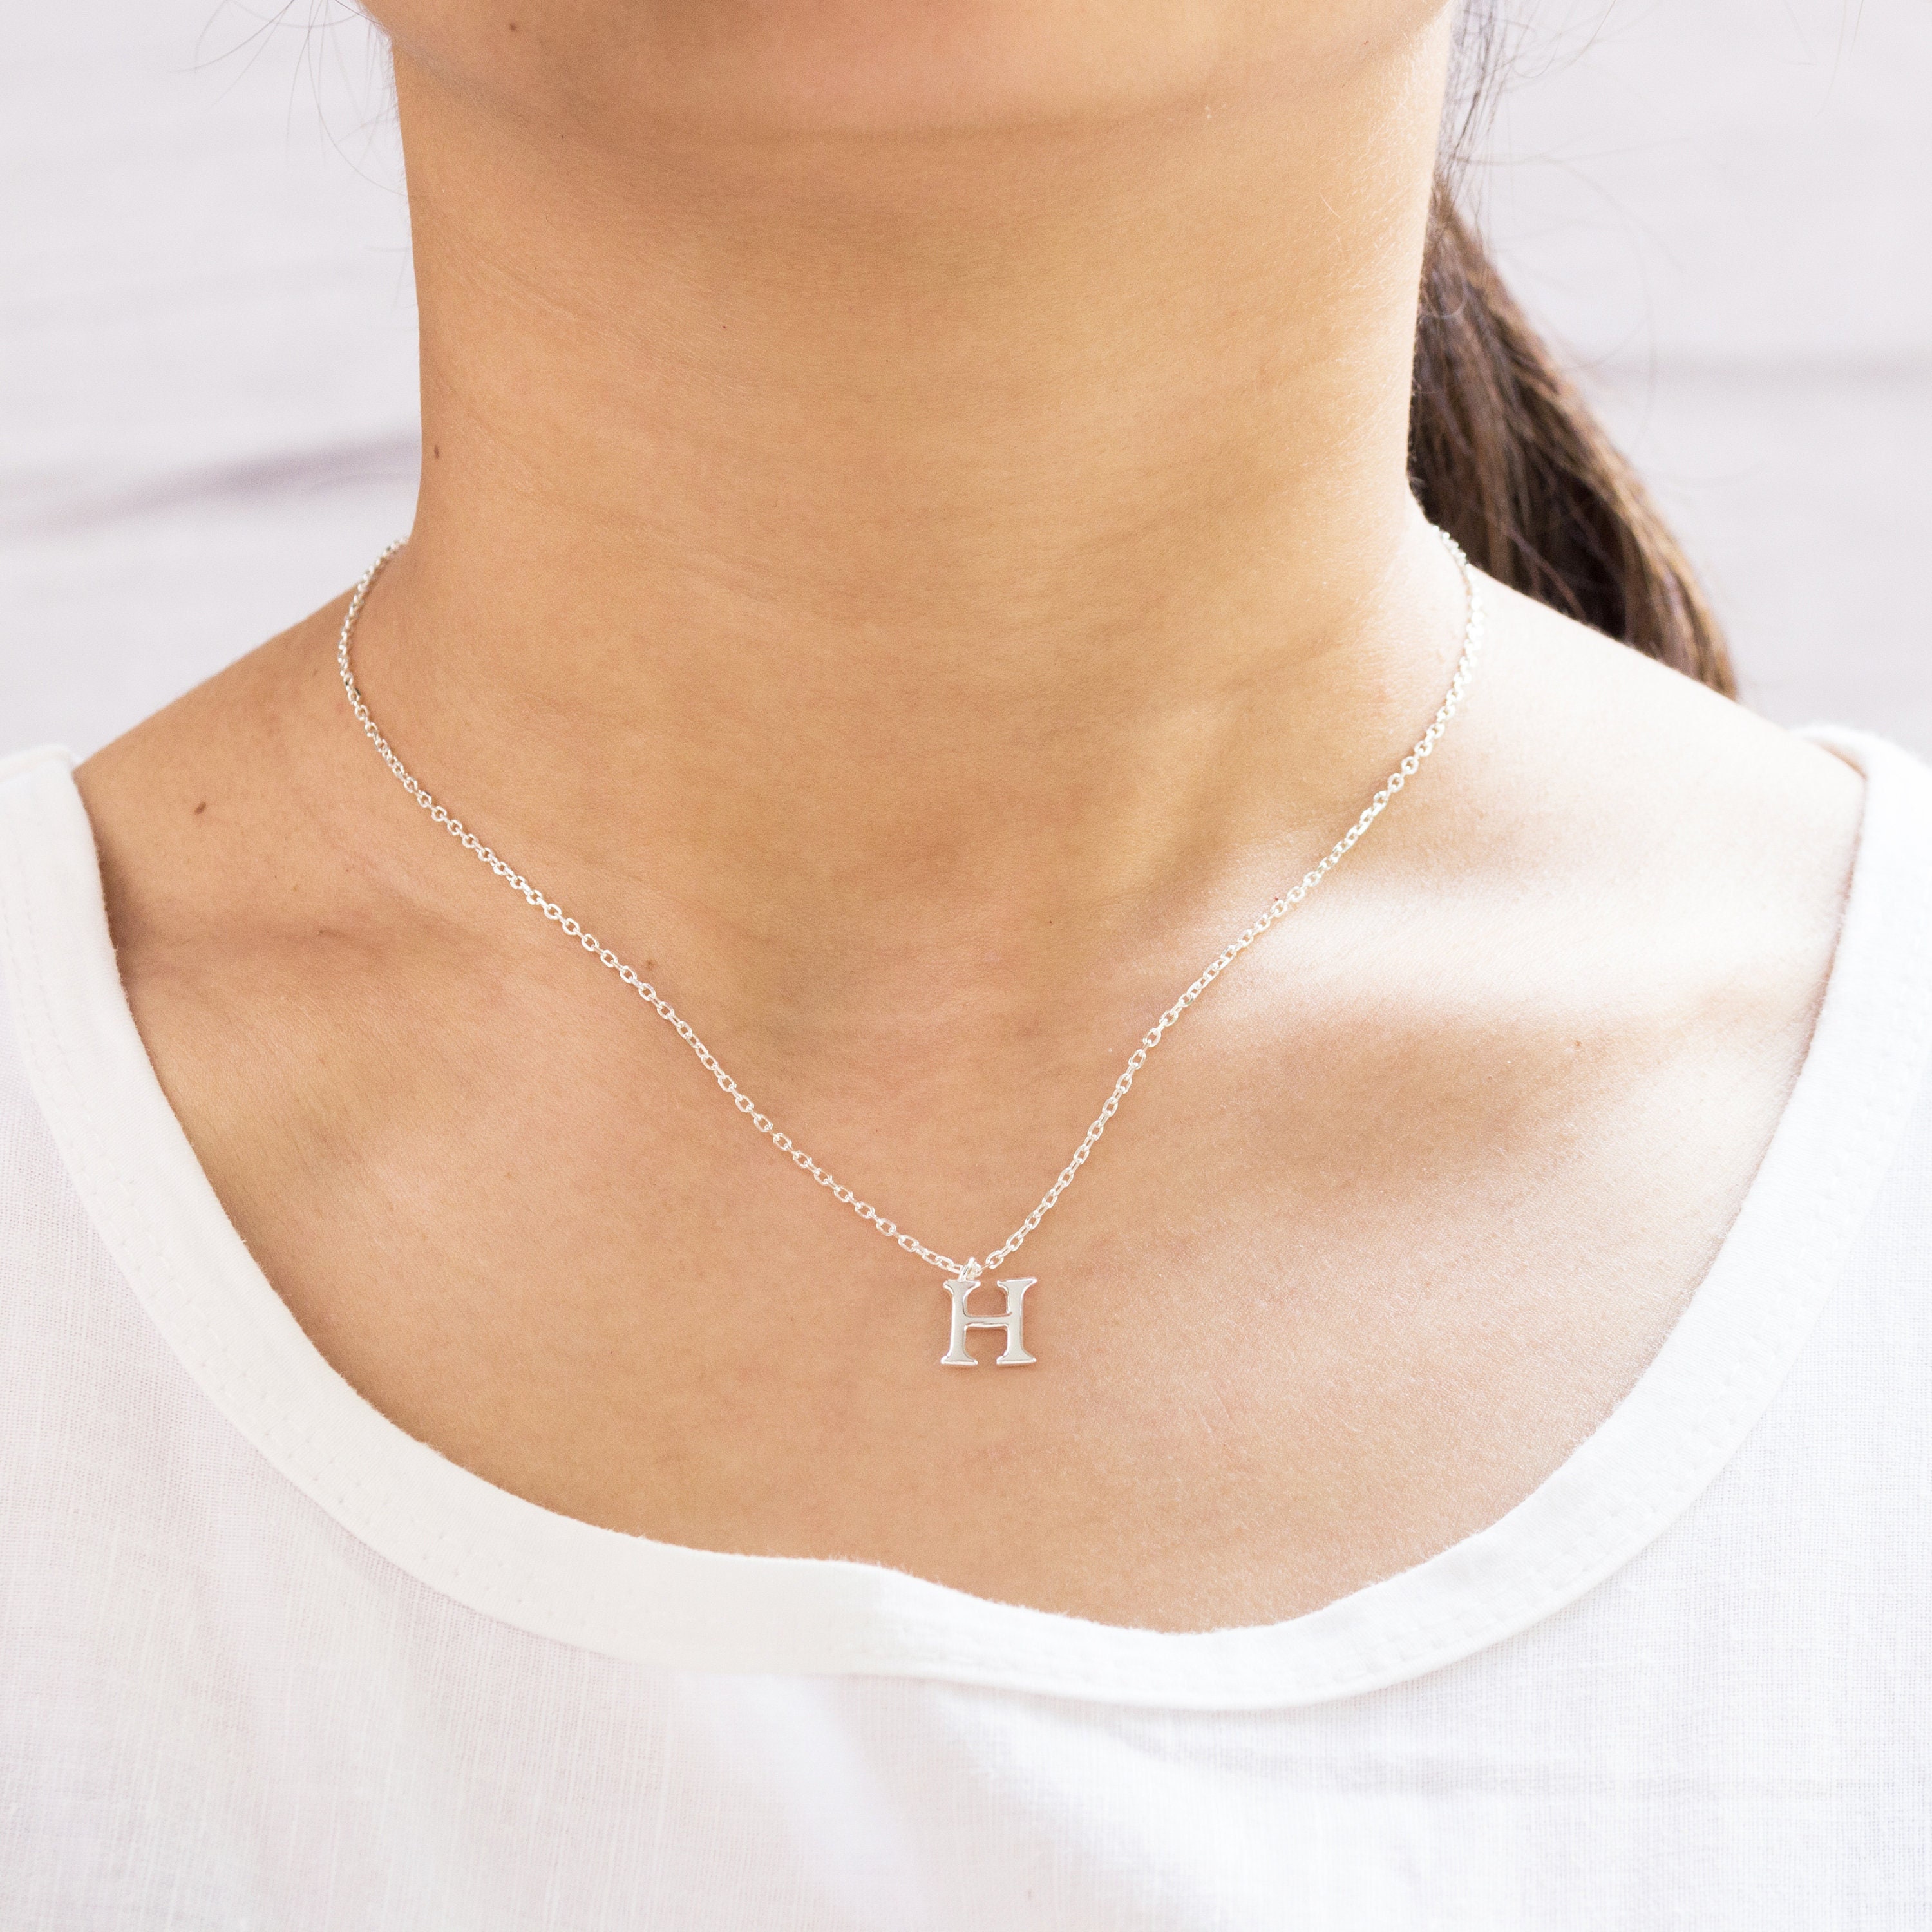 Initial Letter Necklace with Diamond Charm | Uno.London | UNO.LONDON